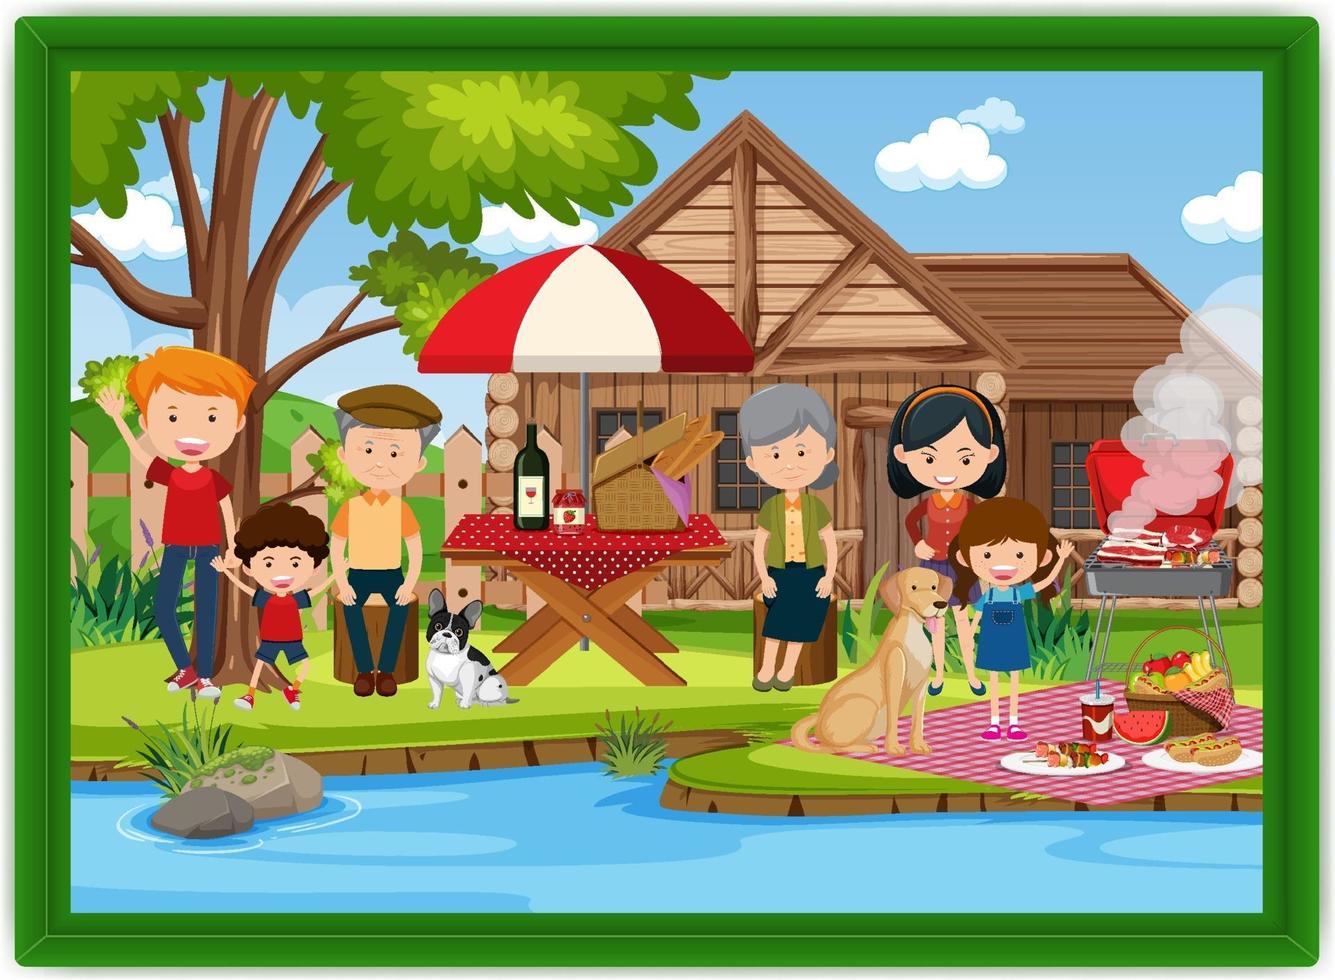 Happy family picnic outdoor scene photo in a frame vector